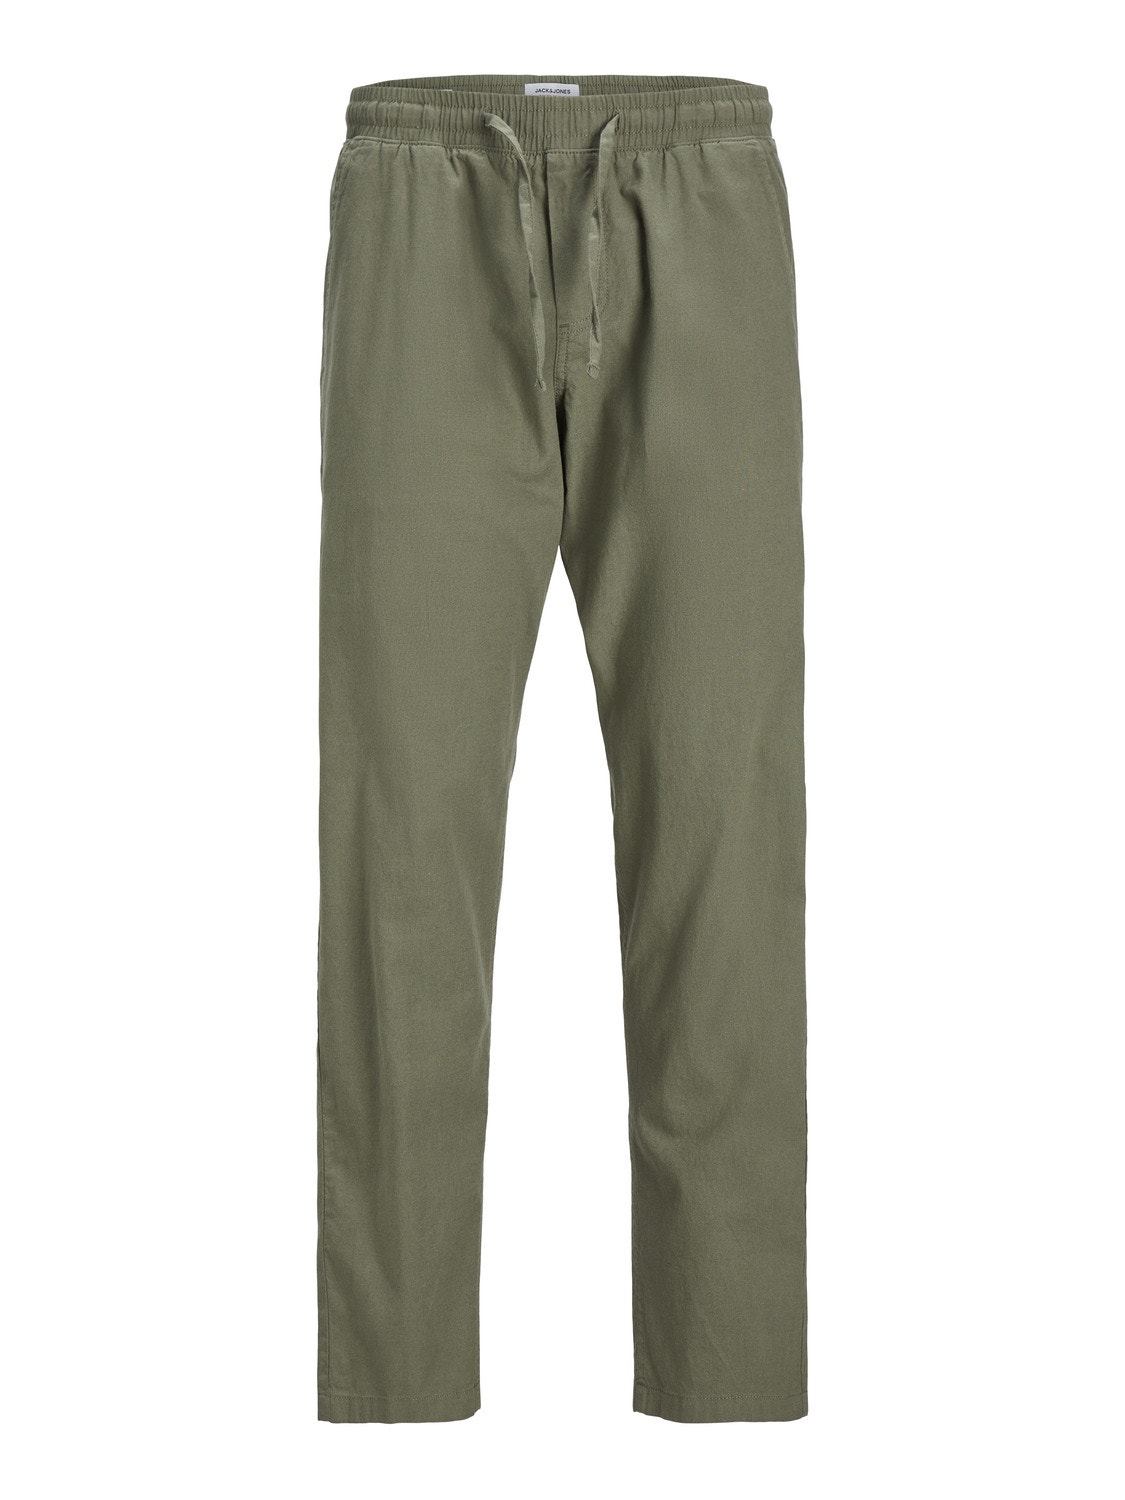 Jack & Jones Relaxed Fit Classic trousers -Dusty Olive - 12248606